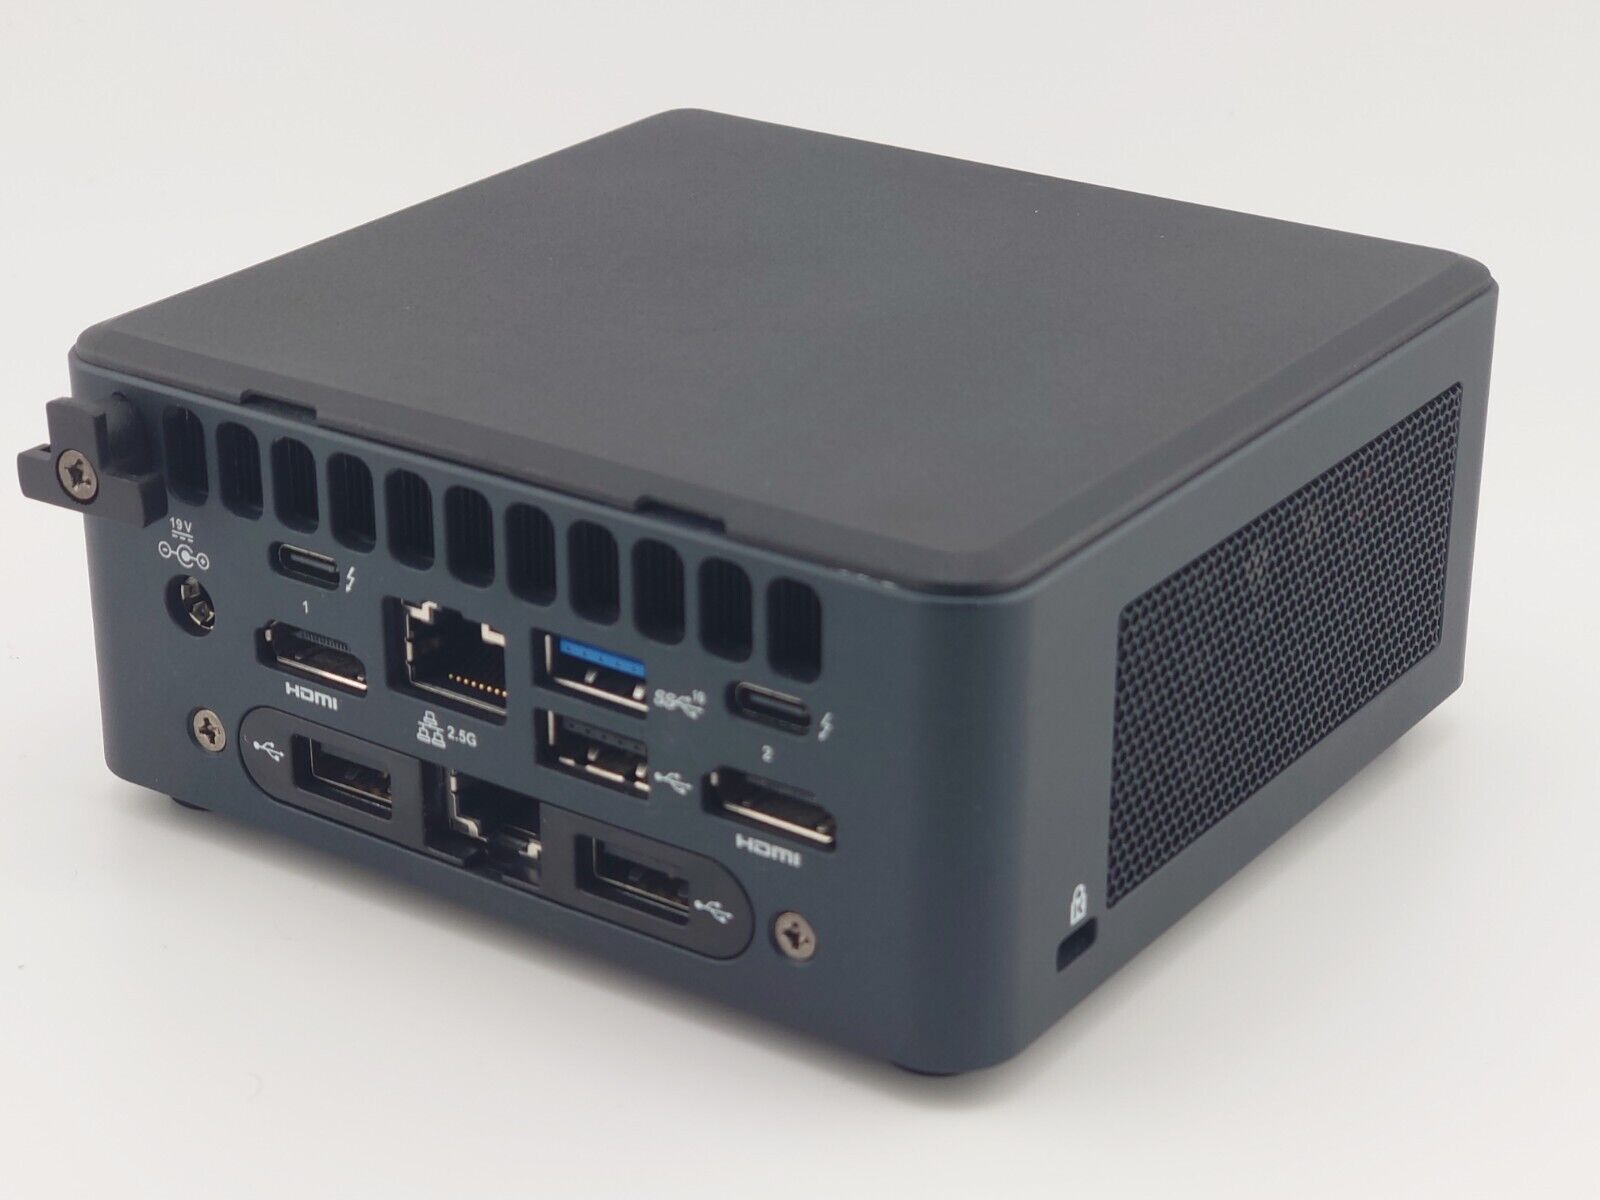 Intel NUC 11 i5-1135G7 (64GB RAM, 2x 1TB SSDs, 2x 2.5GB NICs) Mini PC + Charger